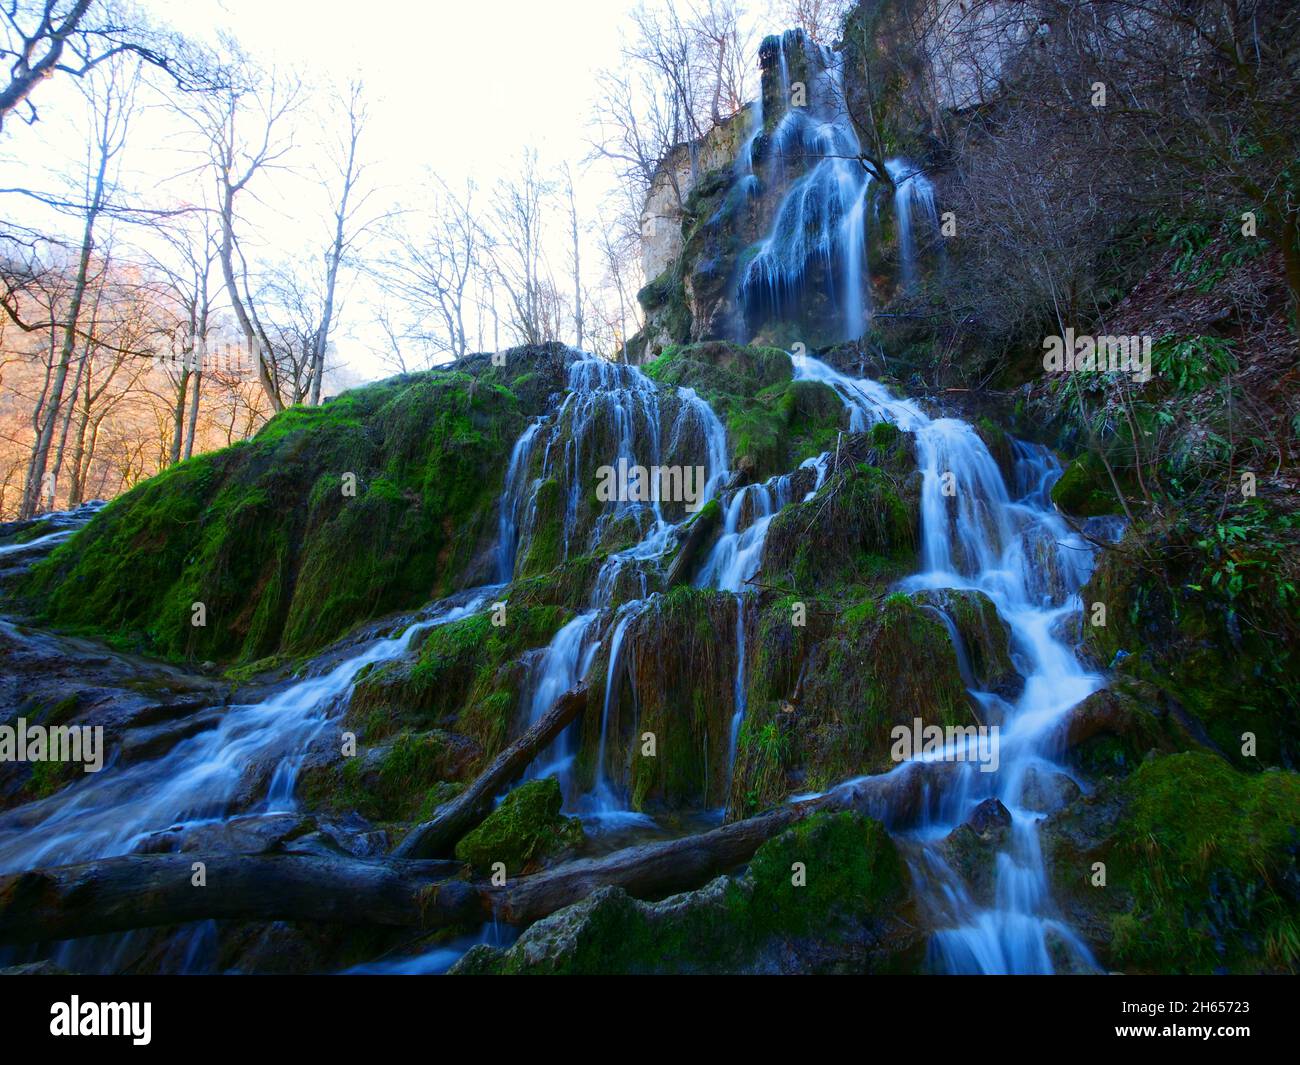 Bad Urach, Germany: The scenic waterfall in spring Stock Photo